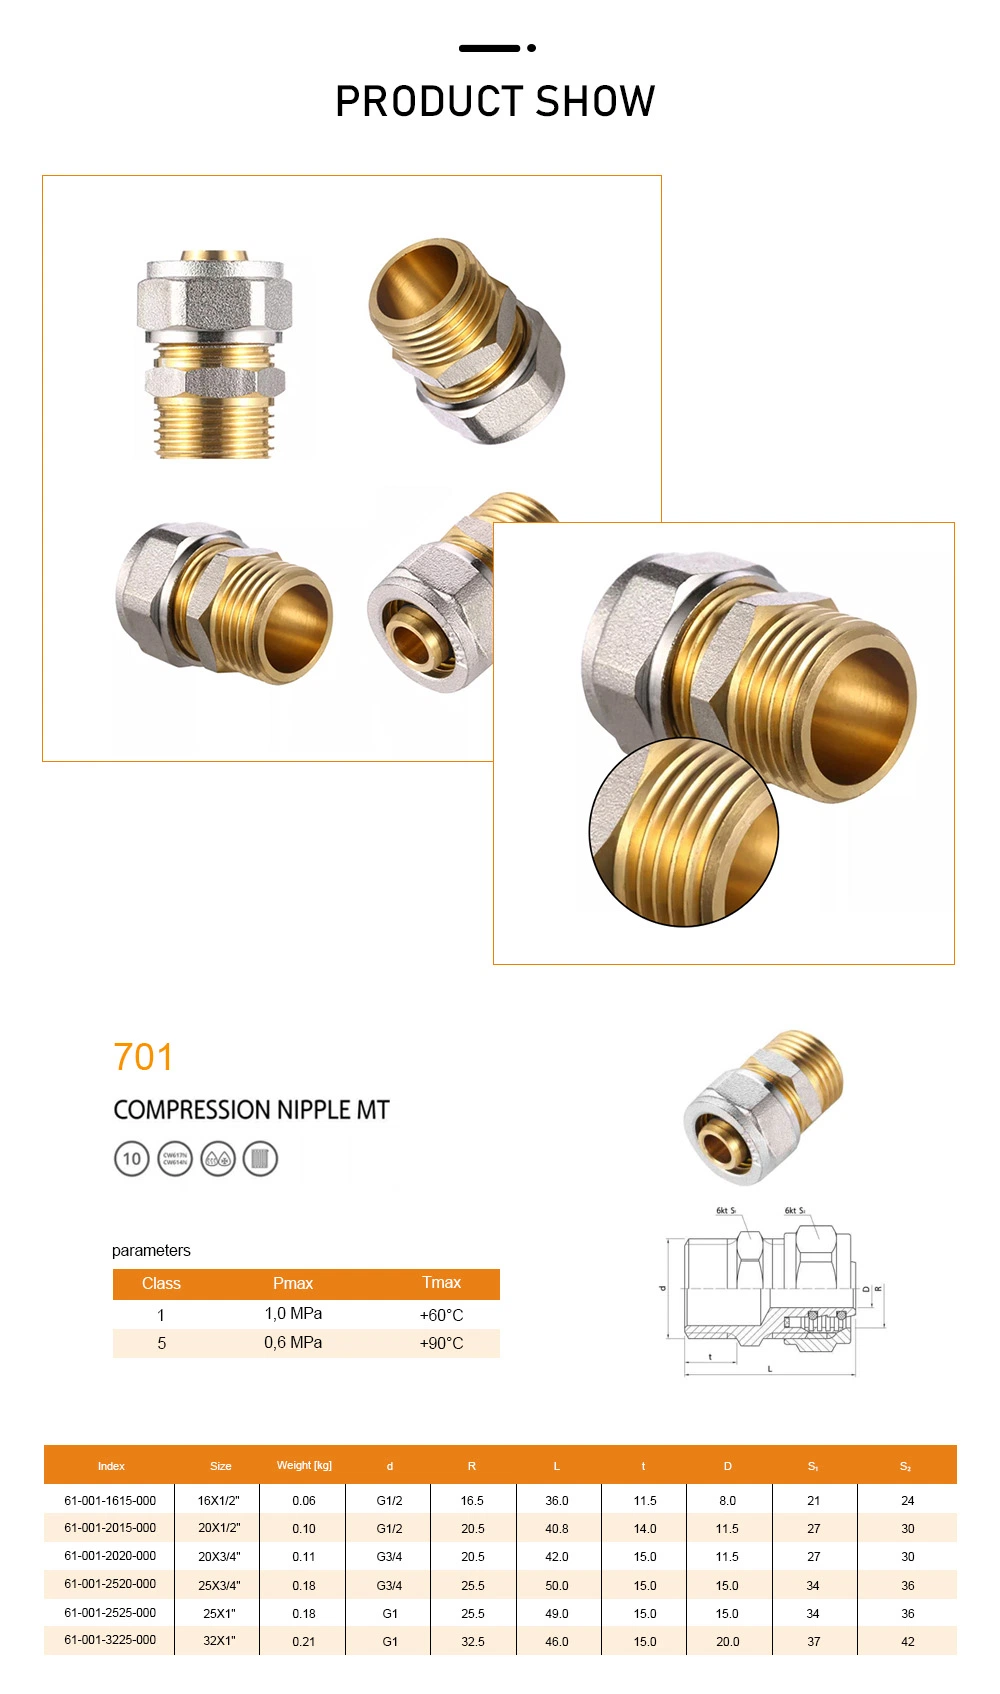 Plumbing Materials Underfloor Heating System Straight Male Plumbing Screw Socket Coupling Pipe Fittings Pex Brass Compression Fitting Brass Fittings